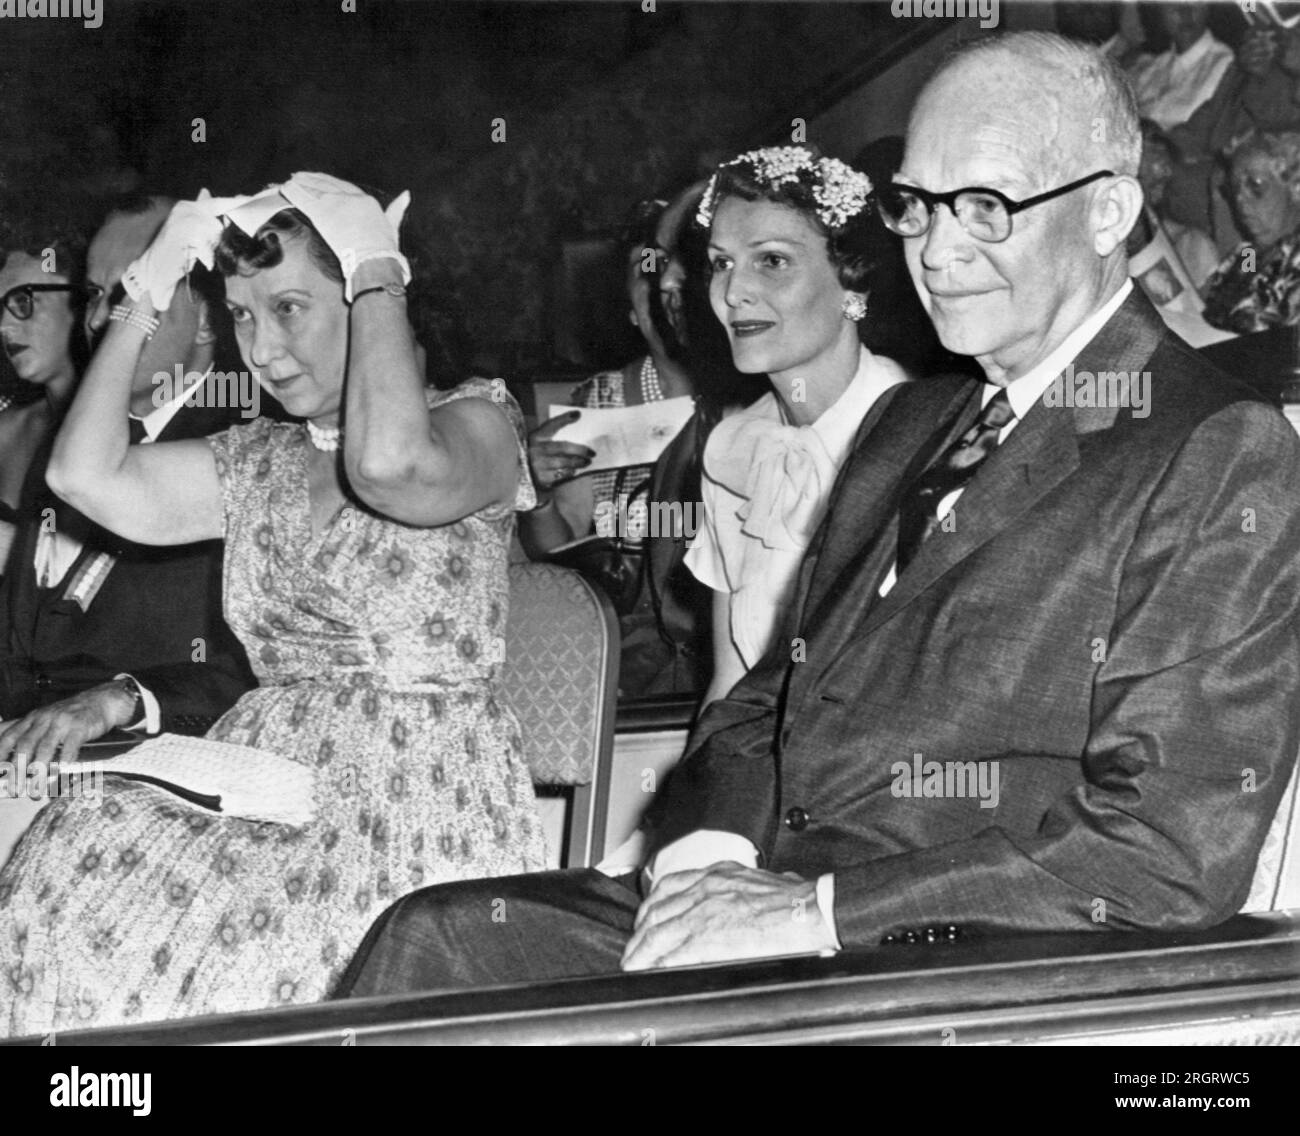 Washington, D.C.:  June 20, 1957. President and Mrs. Eisenhower and Mrs. Pat Nixon attend the annual convention of the National Federation of Young Republicans at Constitution Hall. Stock Photo